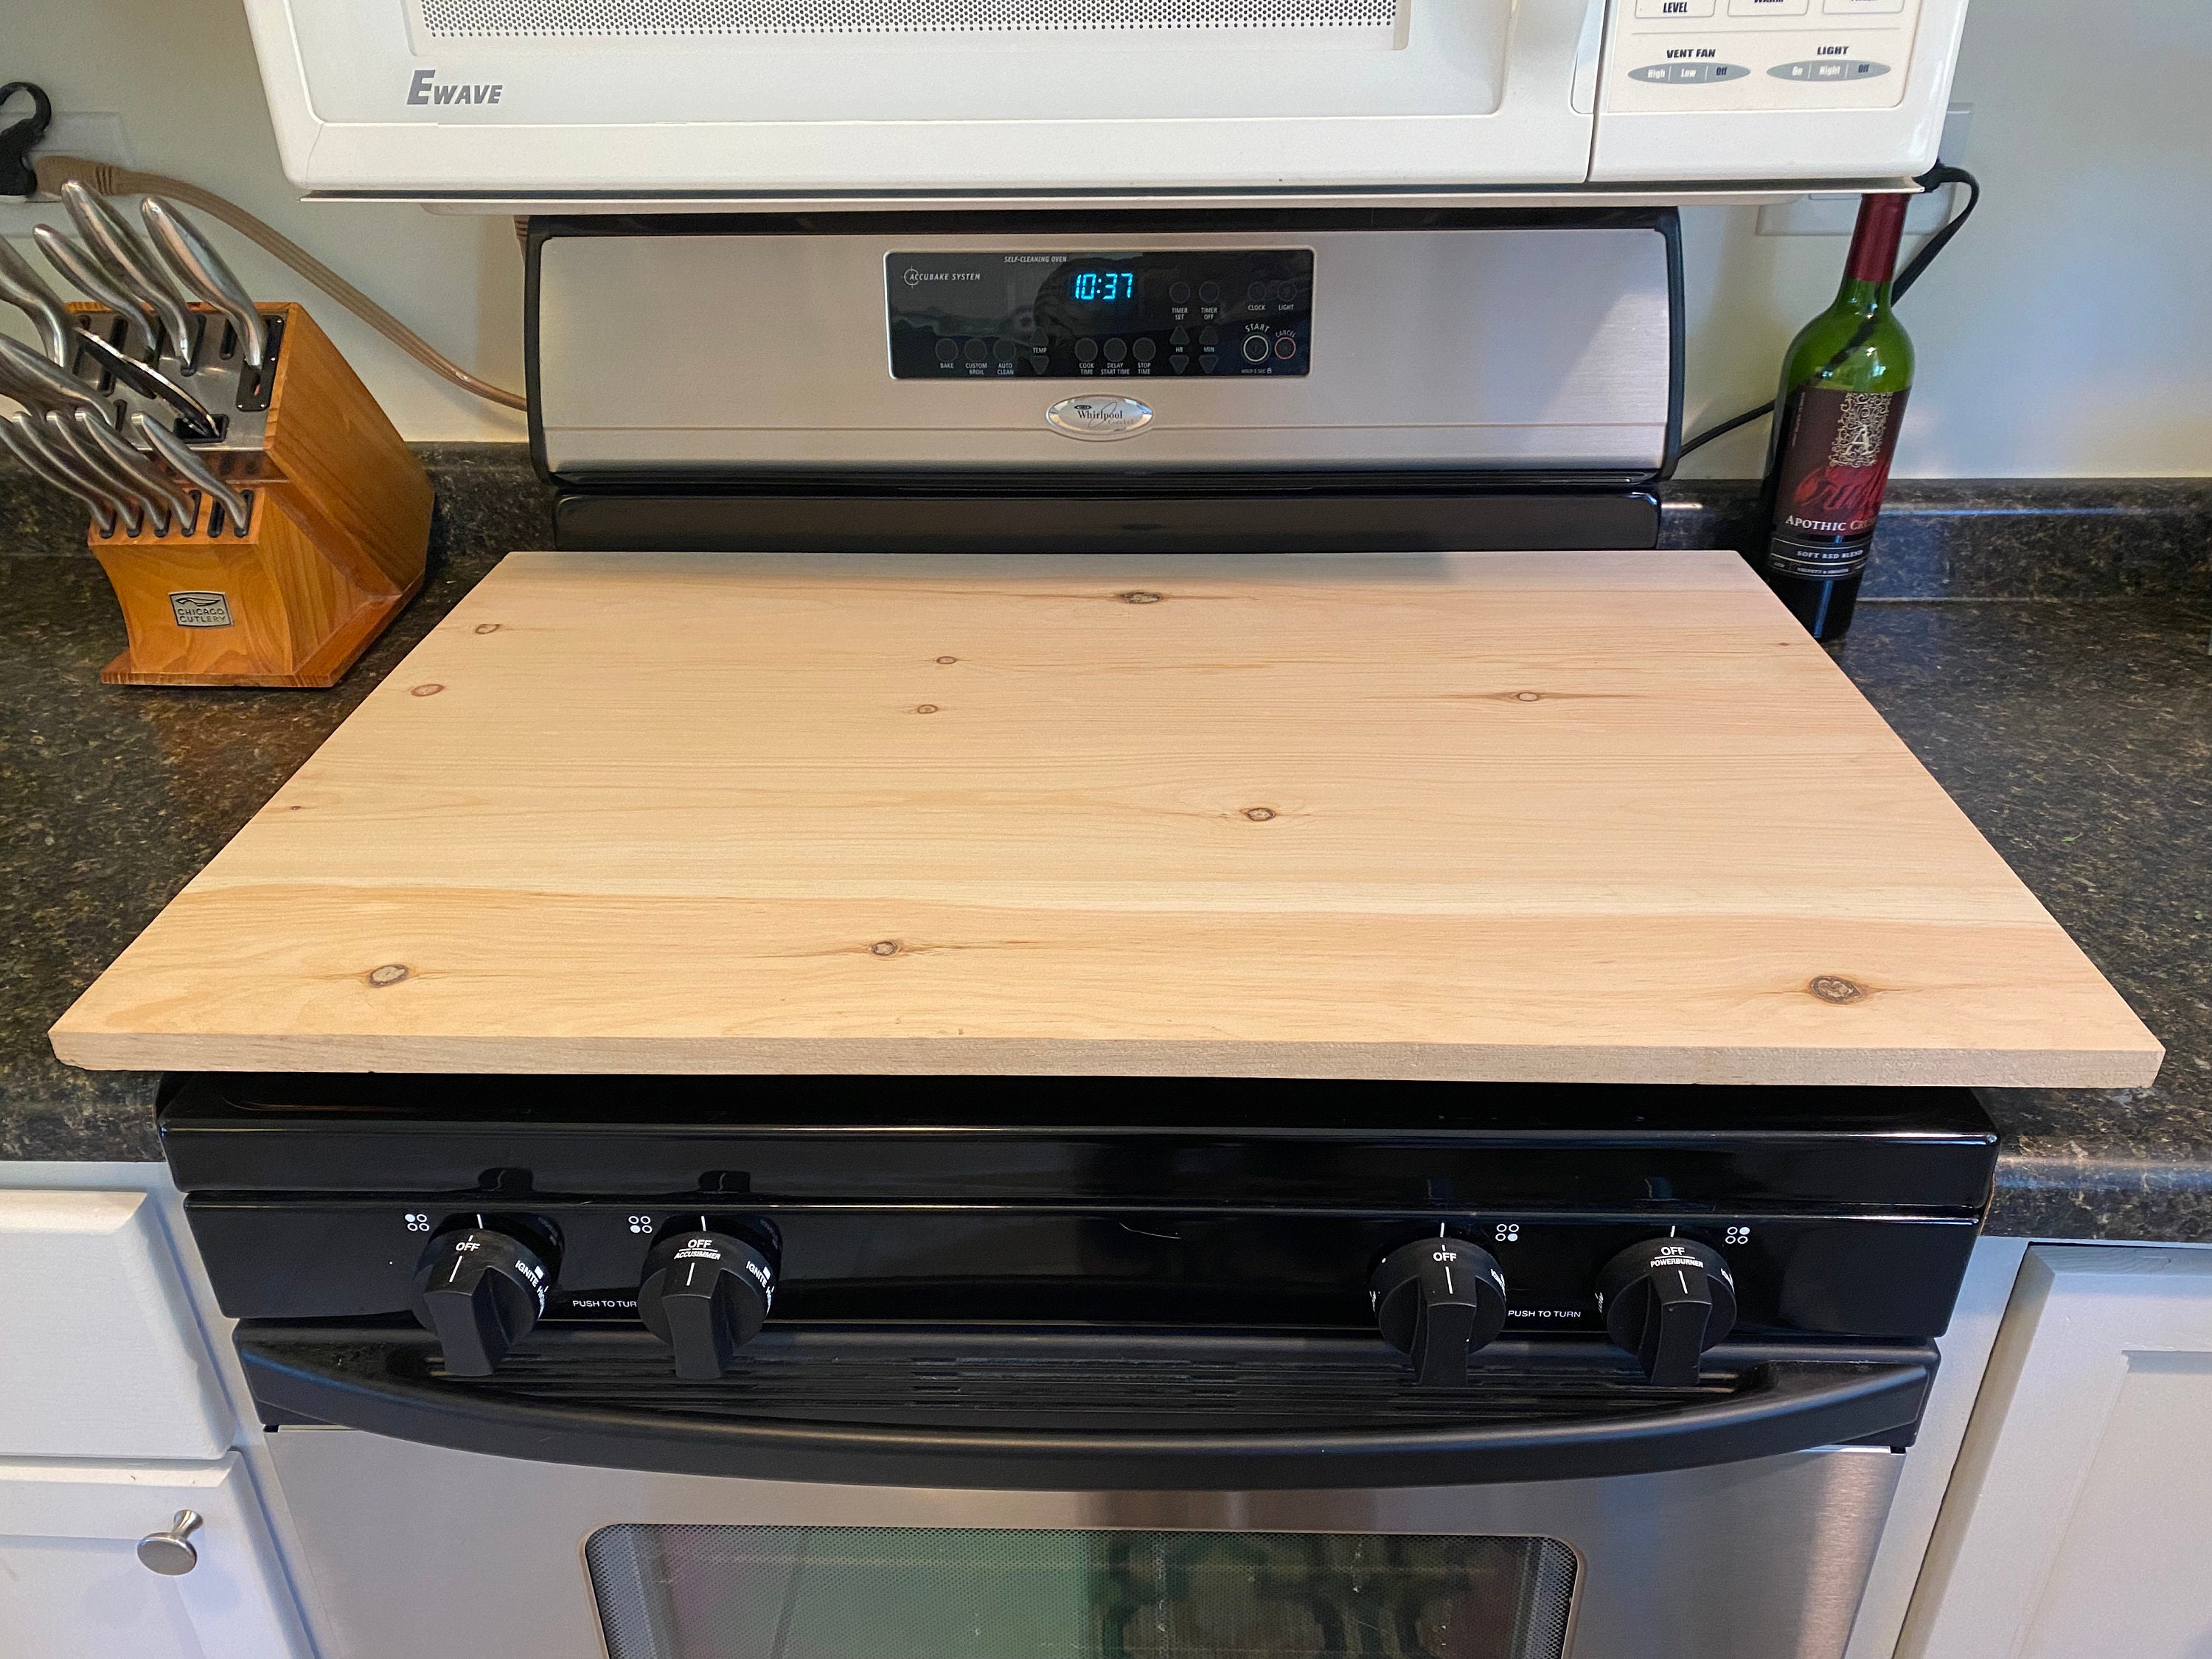 Stove Top Cover, Multiple Sizes Stove Cover, Gas Stove Top Cover, Stove Top  Cover for Electric Stove, Noodleboard Stove Cover, WALNUT FINISH 